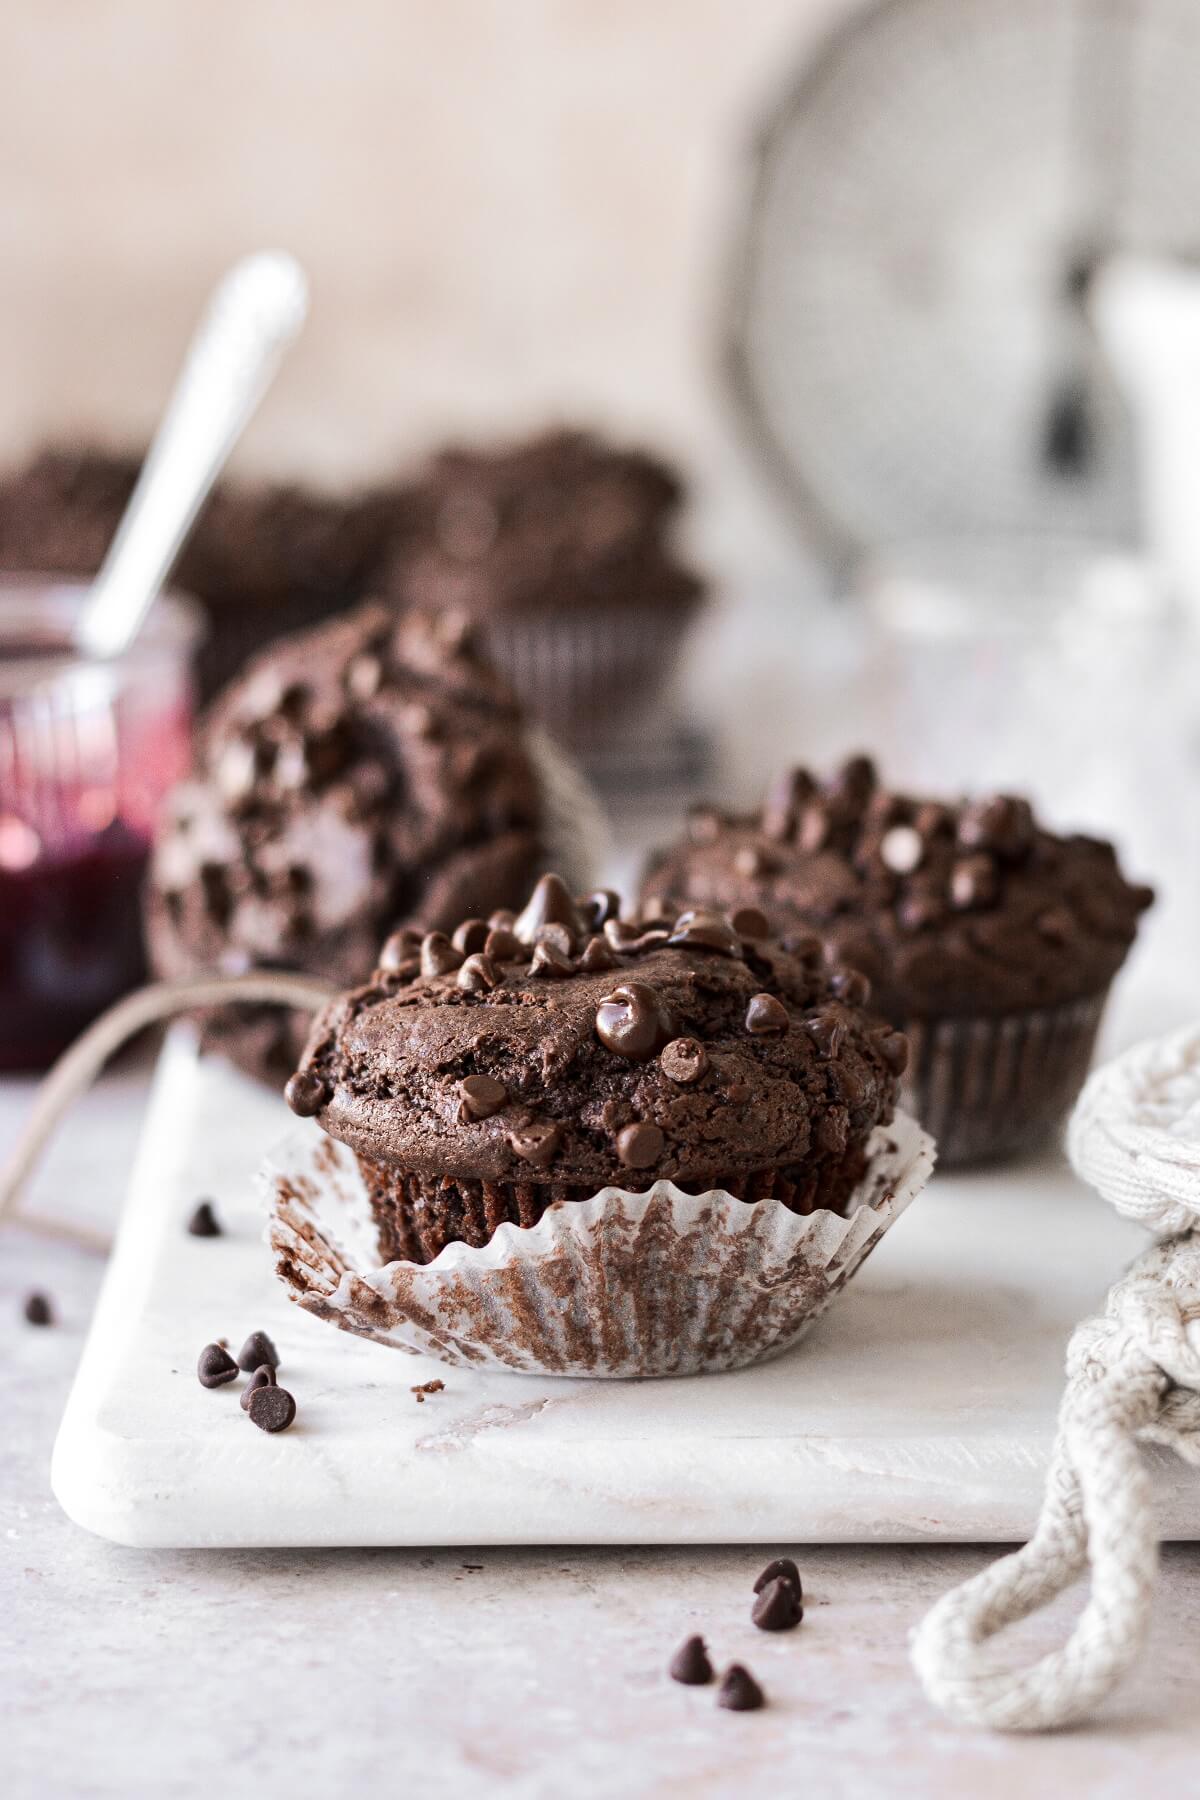 Double chocolate muffins sprinkled with chocolate chips on a white serving board.